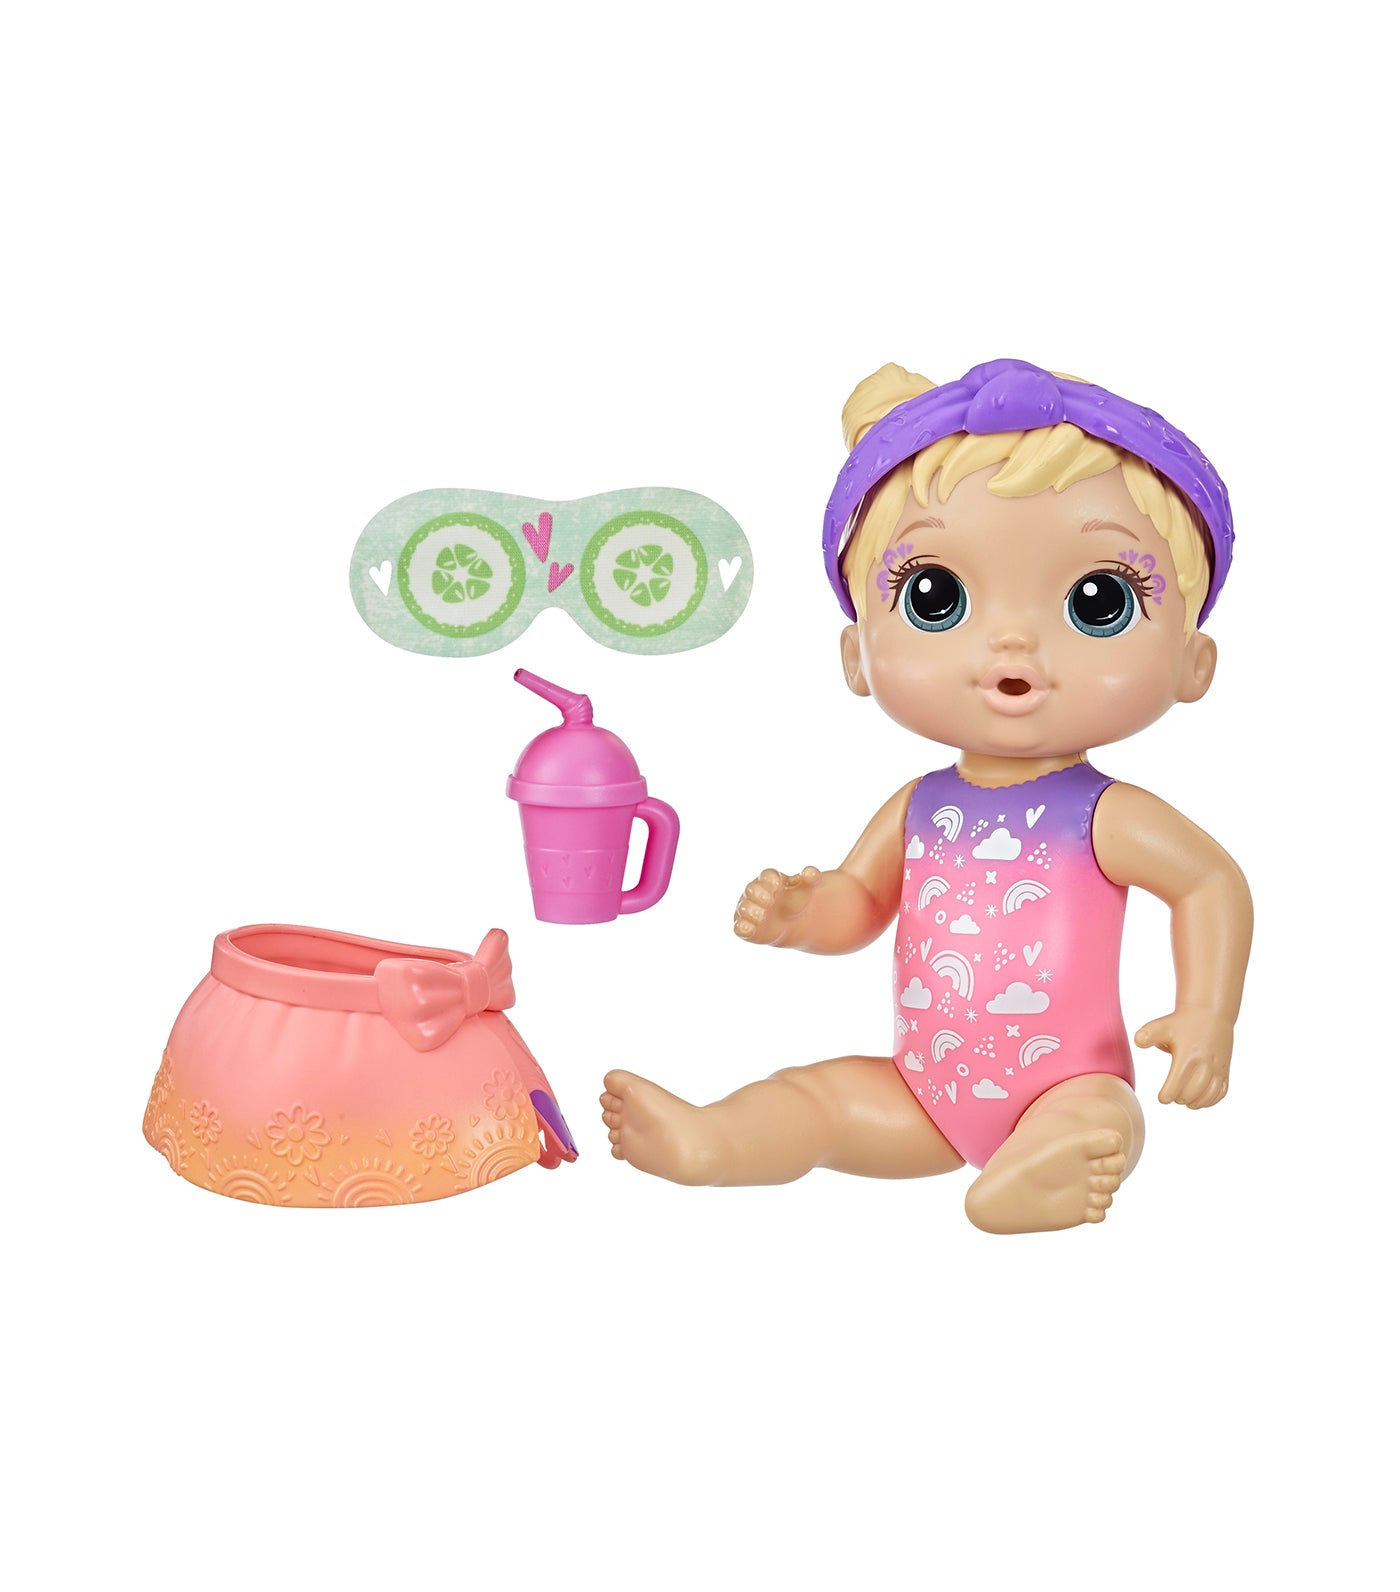 Baby Alive Rainbow Spa Baby Doll - Blonde